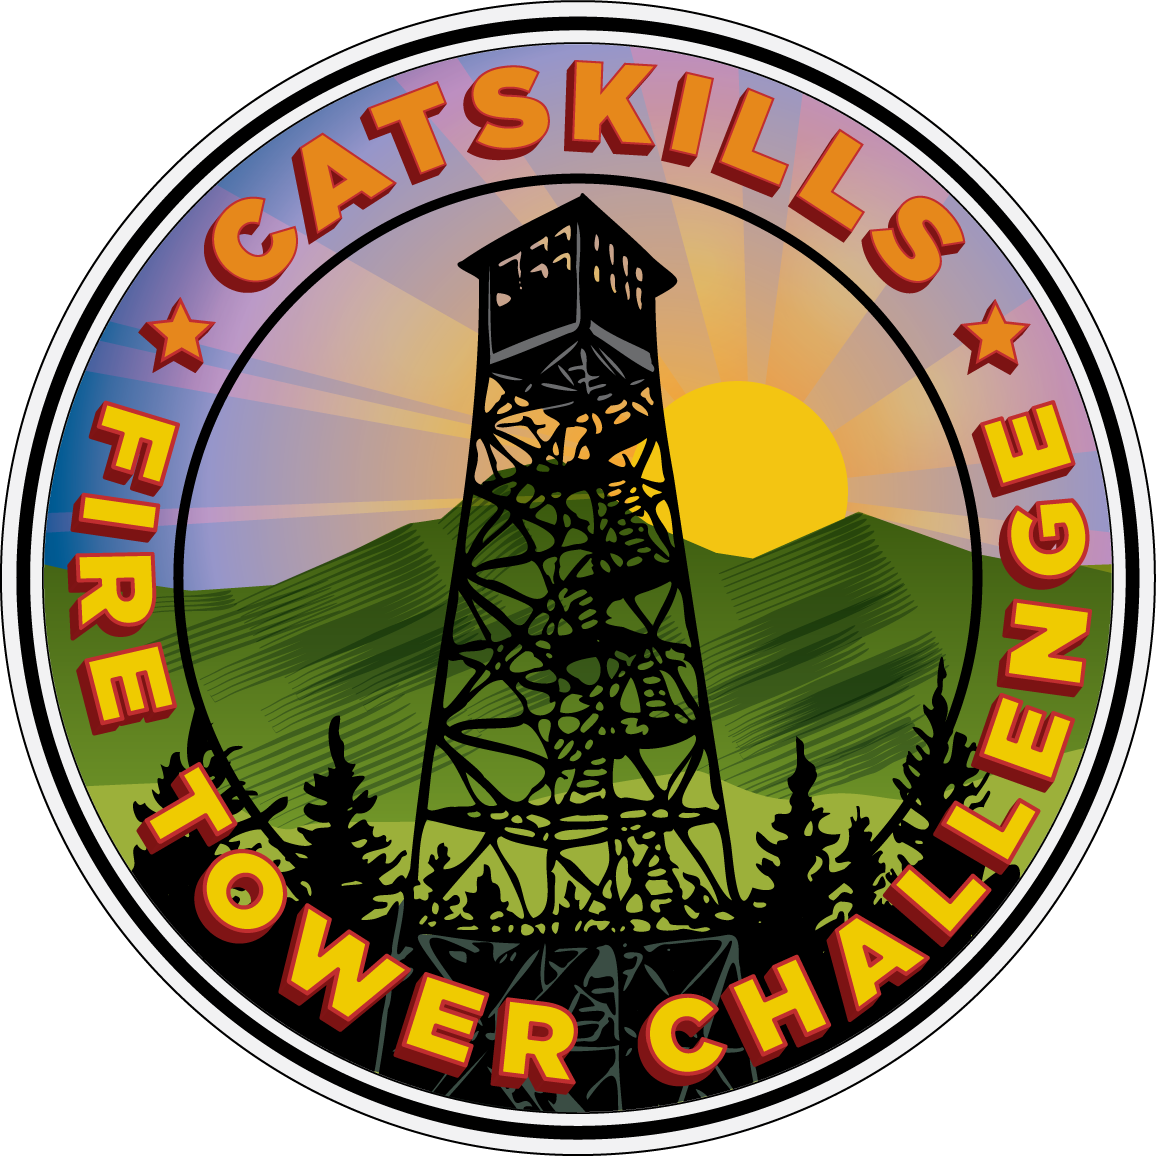 Catskills Fire Tower Challenge Sunday Runs with the Leatherman Harriers